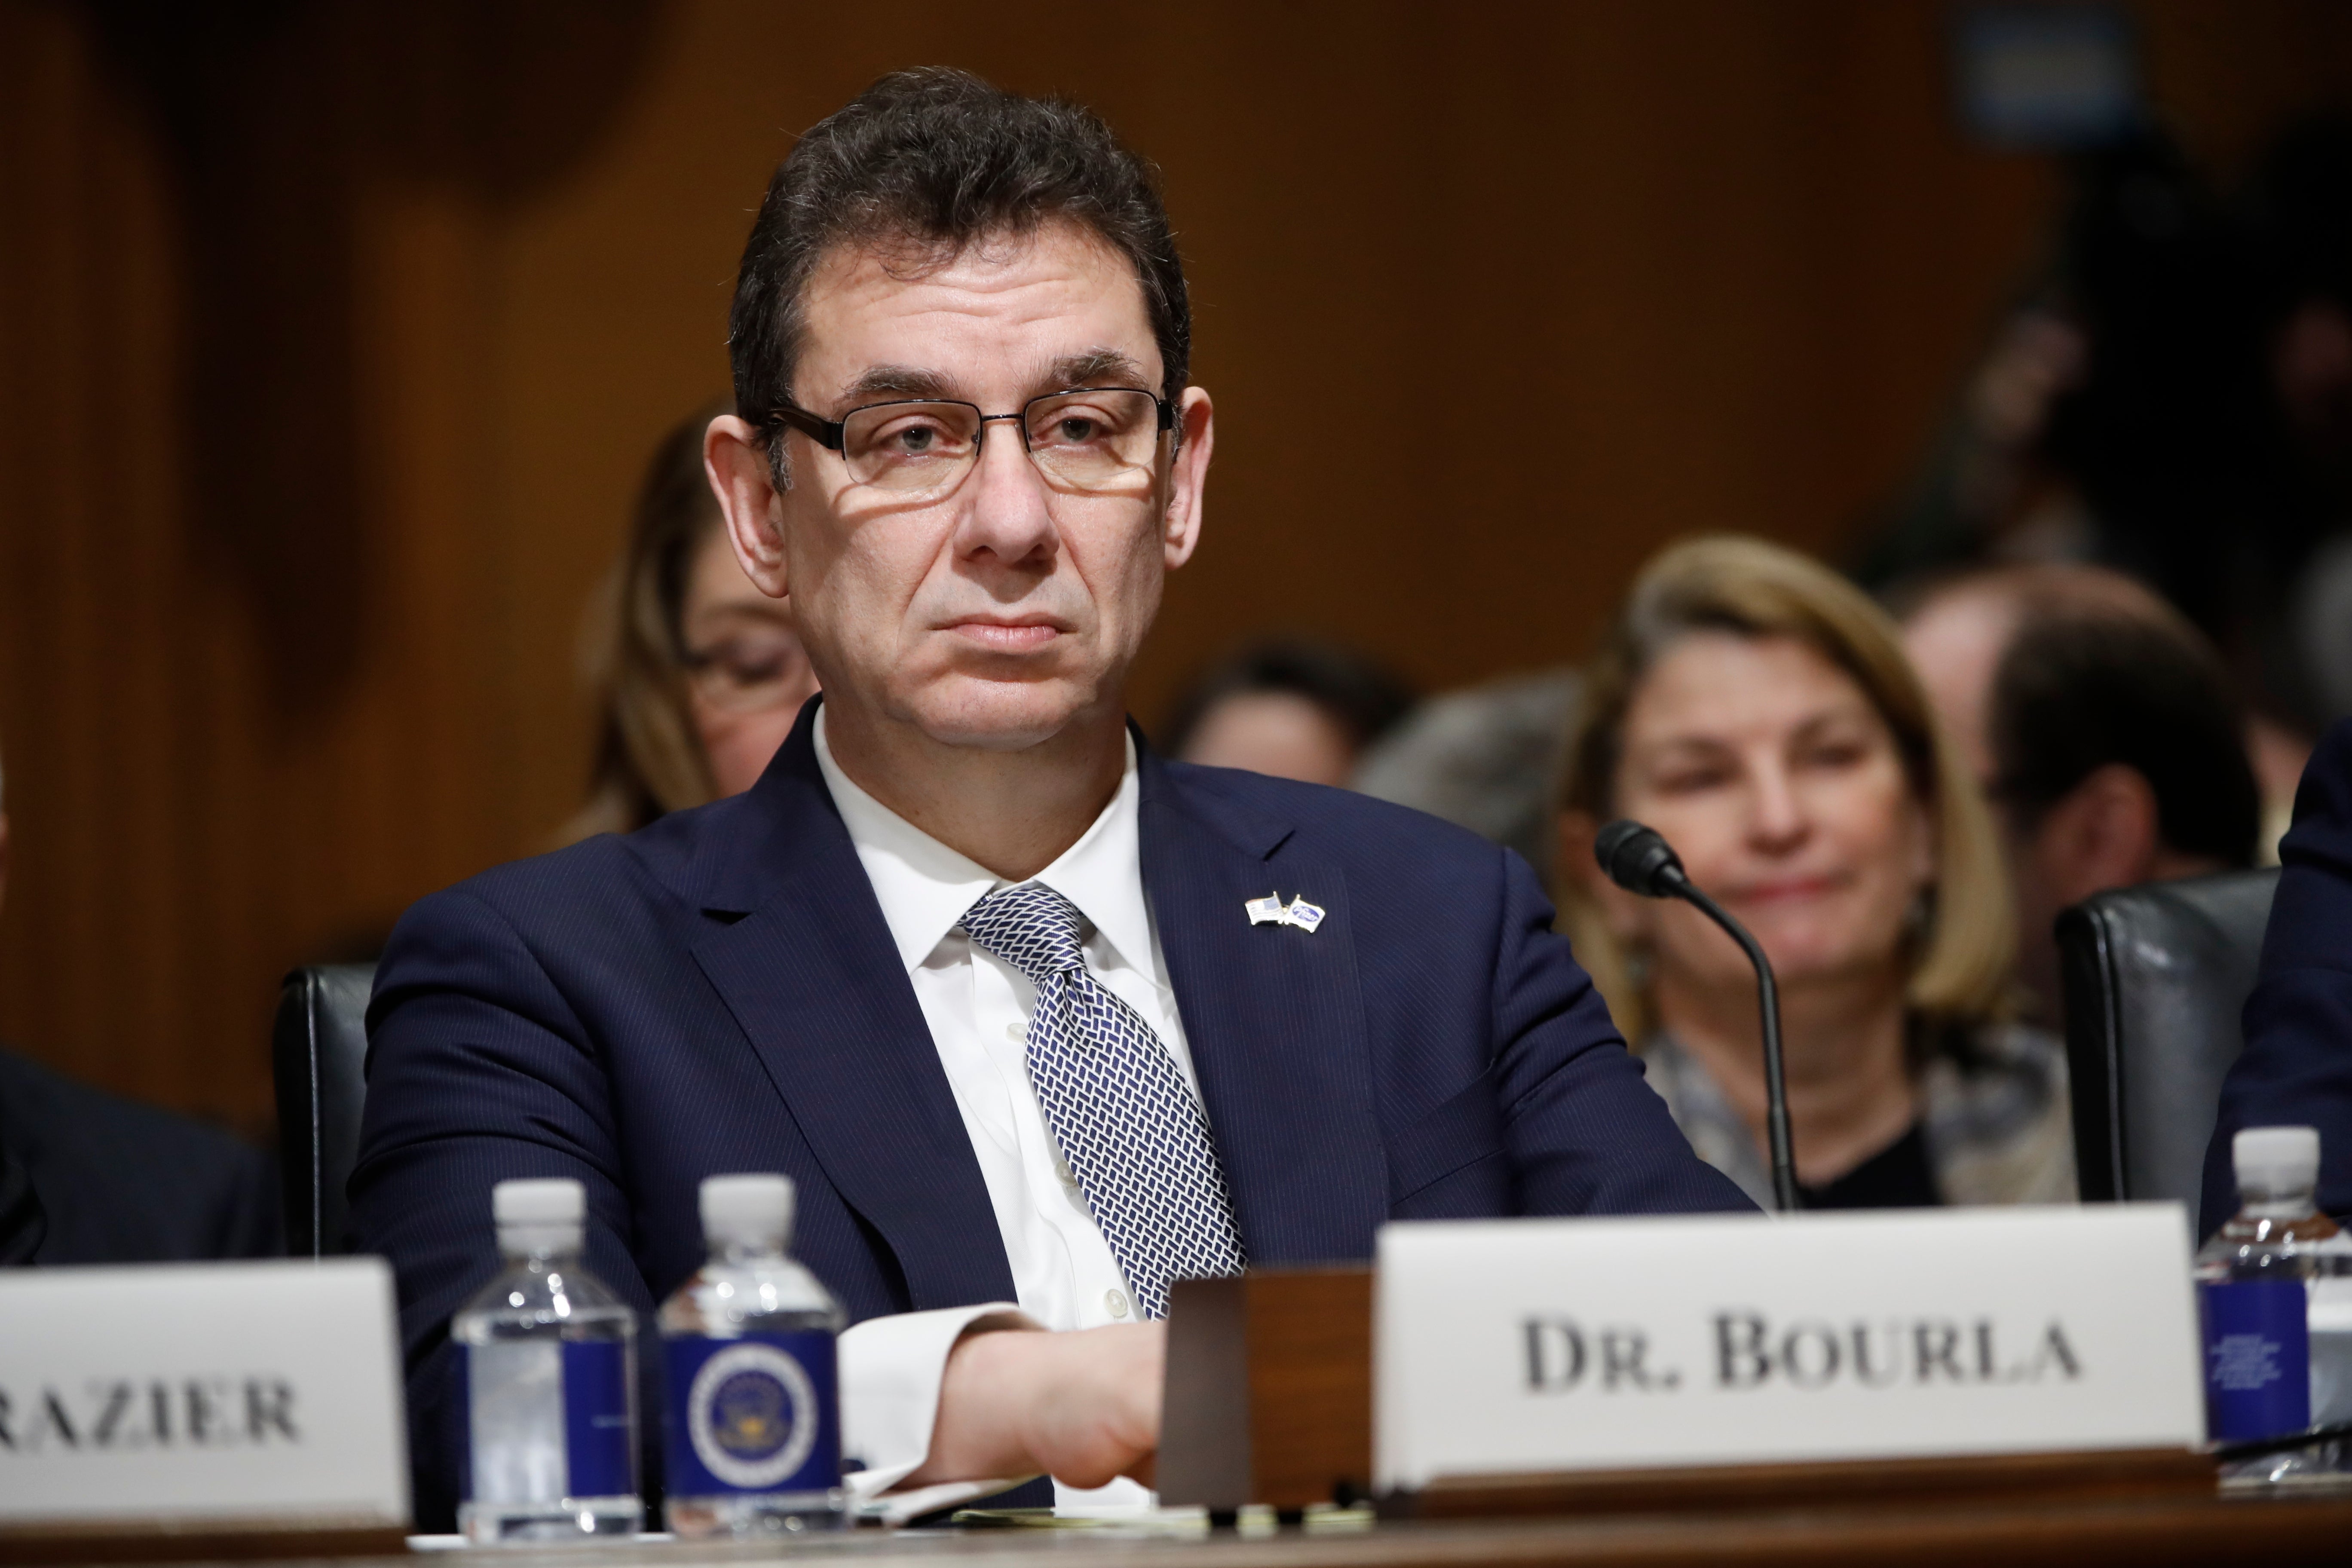 Albert Bourla, the CEO and chairman of Pfizer, is pictured at a Senate Finance Committee hearing on drug prices on 26 February, 2019.